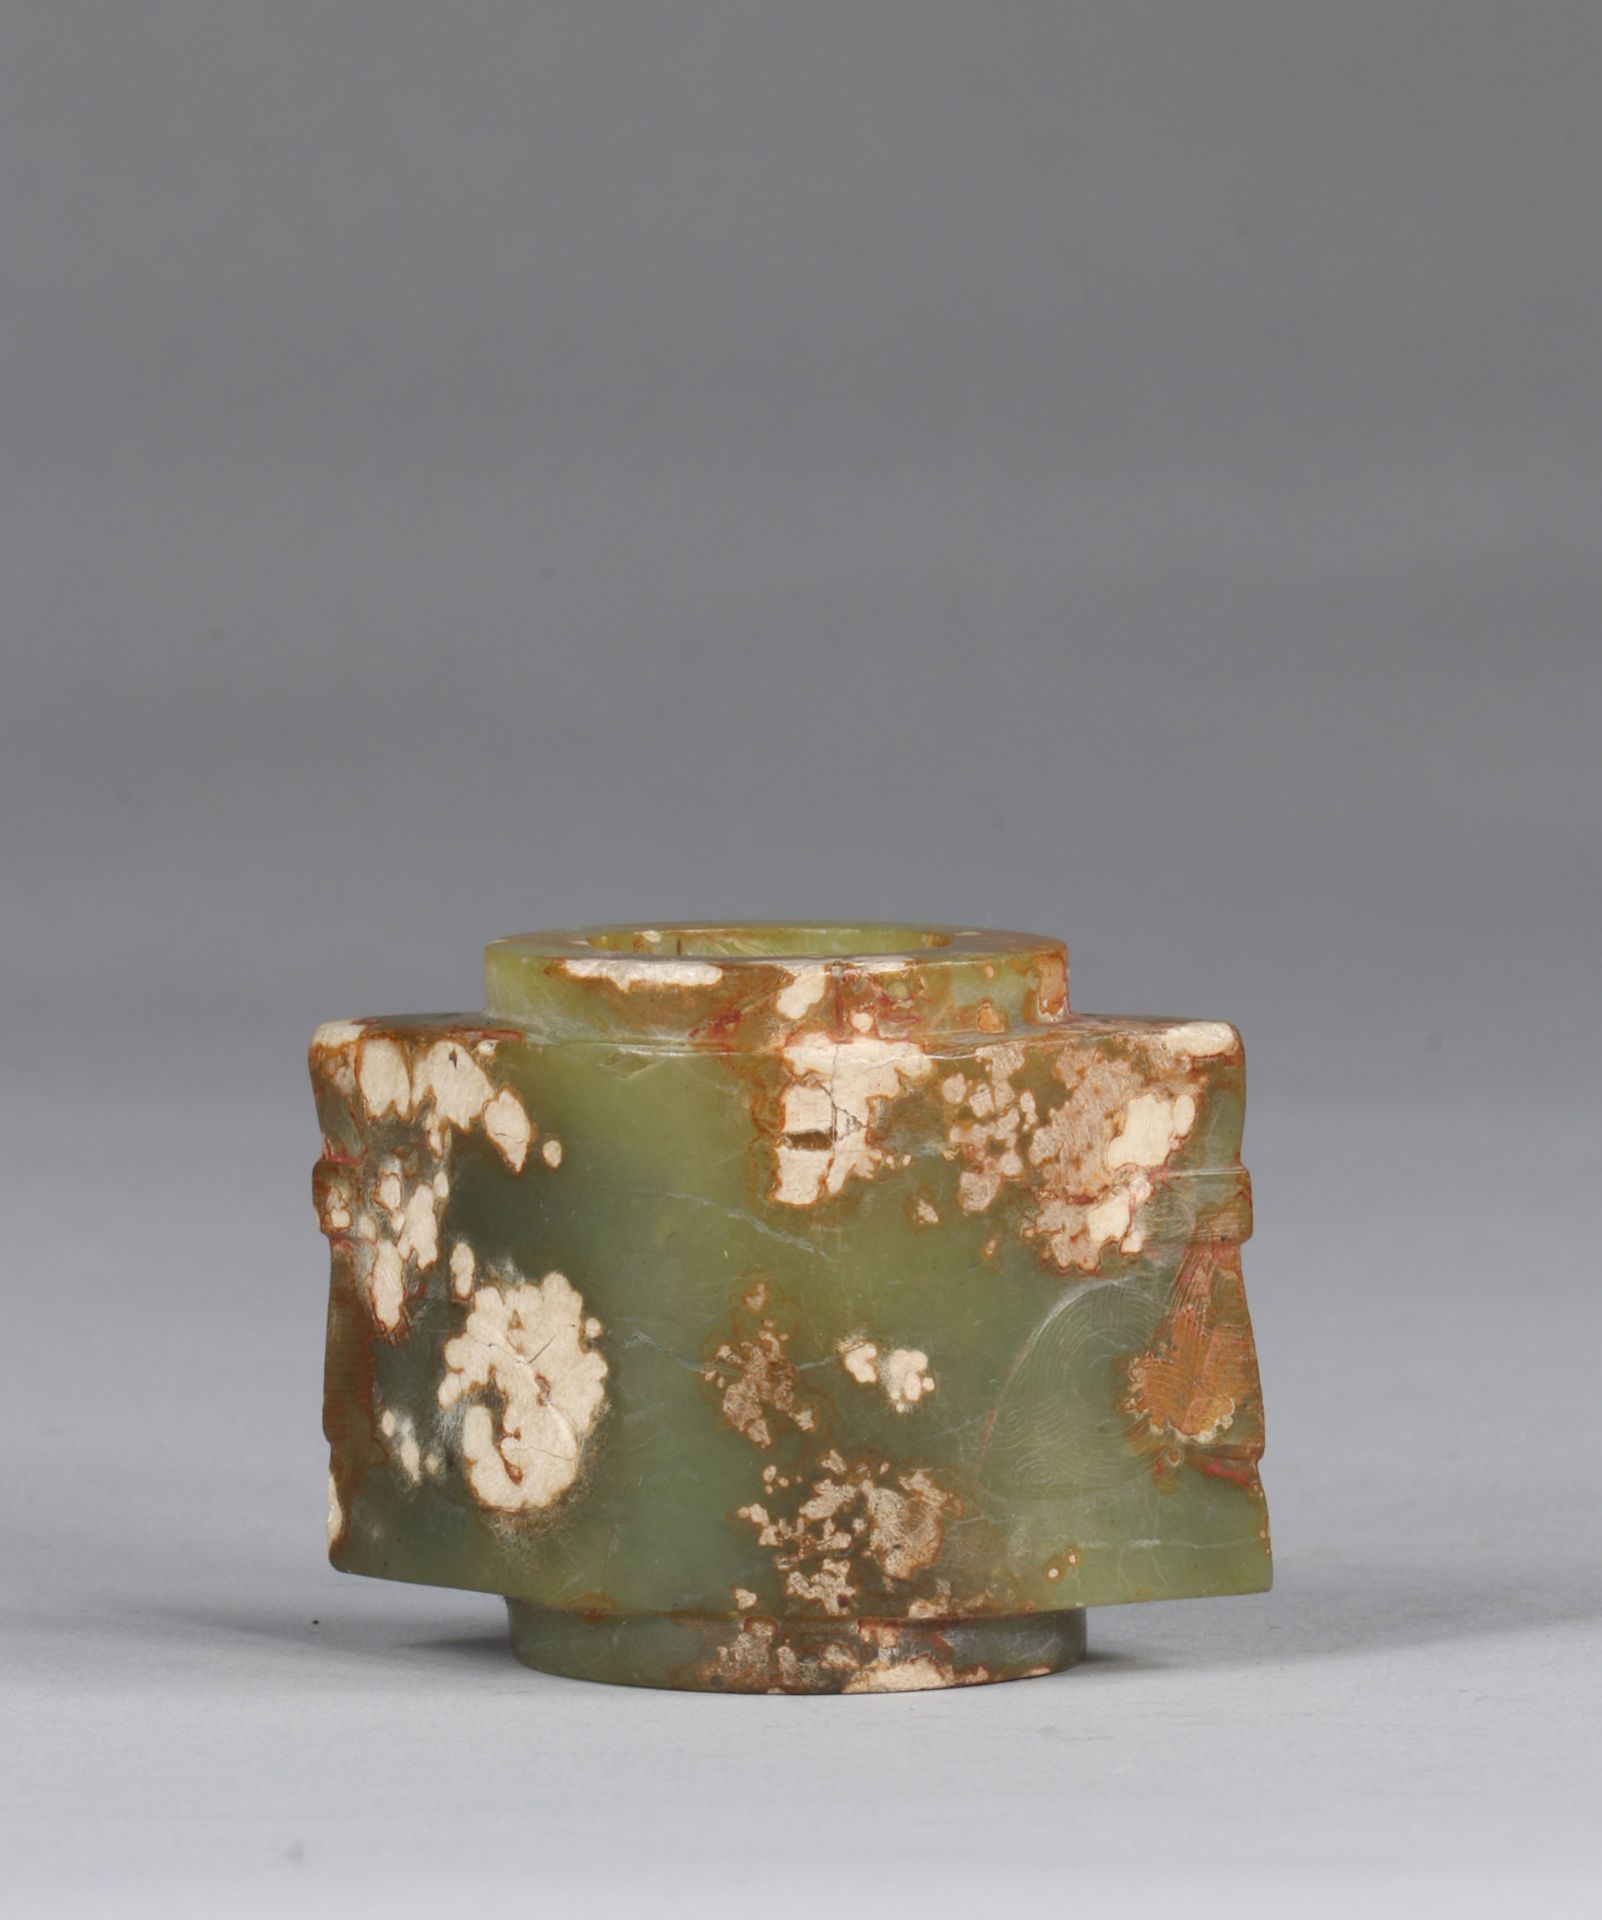 China single stage bacon stone Cong glasses, with traces of cinnabar Tao Tie masks - Image 2 of 5